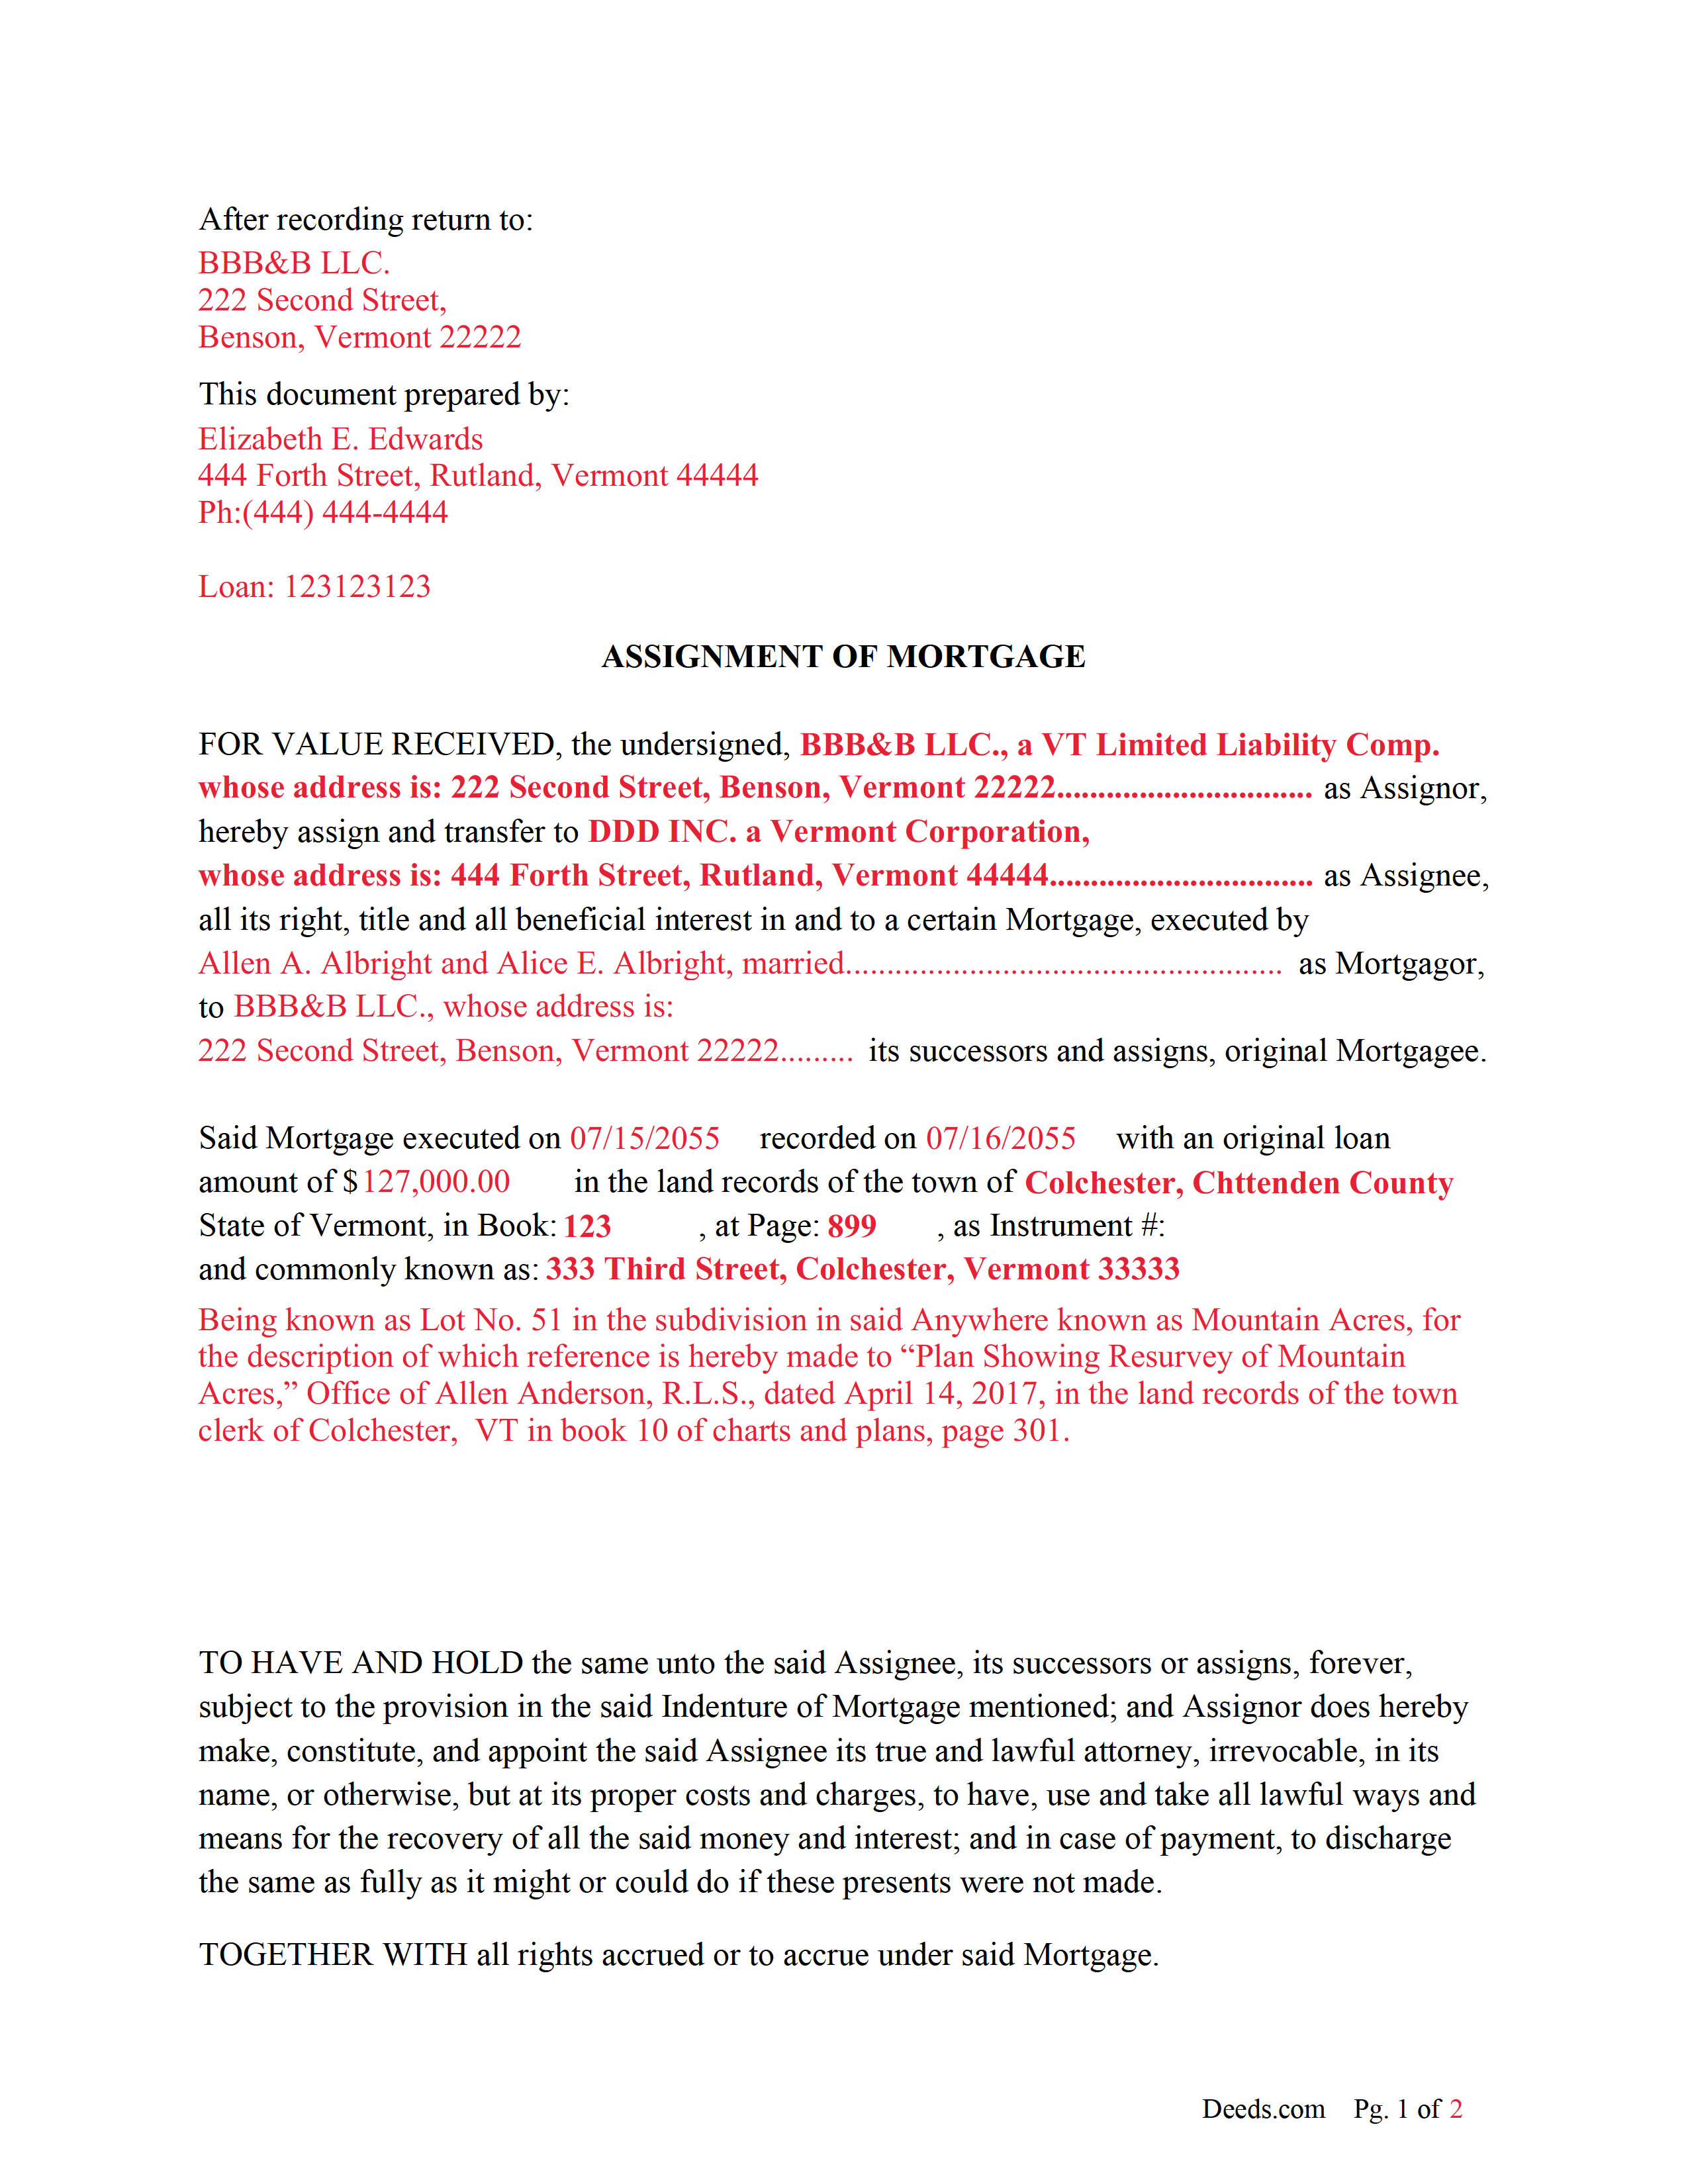 Completed Example of the Assignment of Mortgage Document